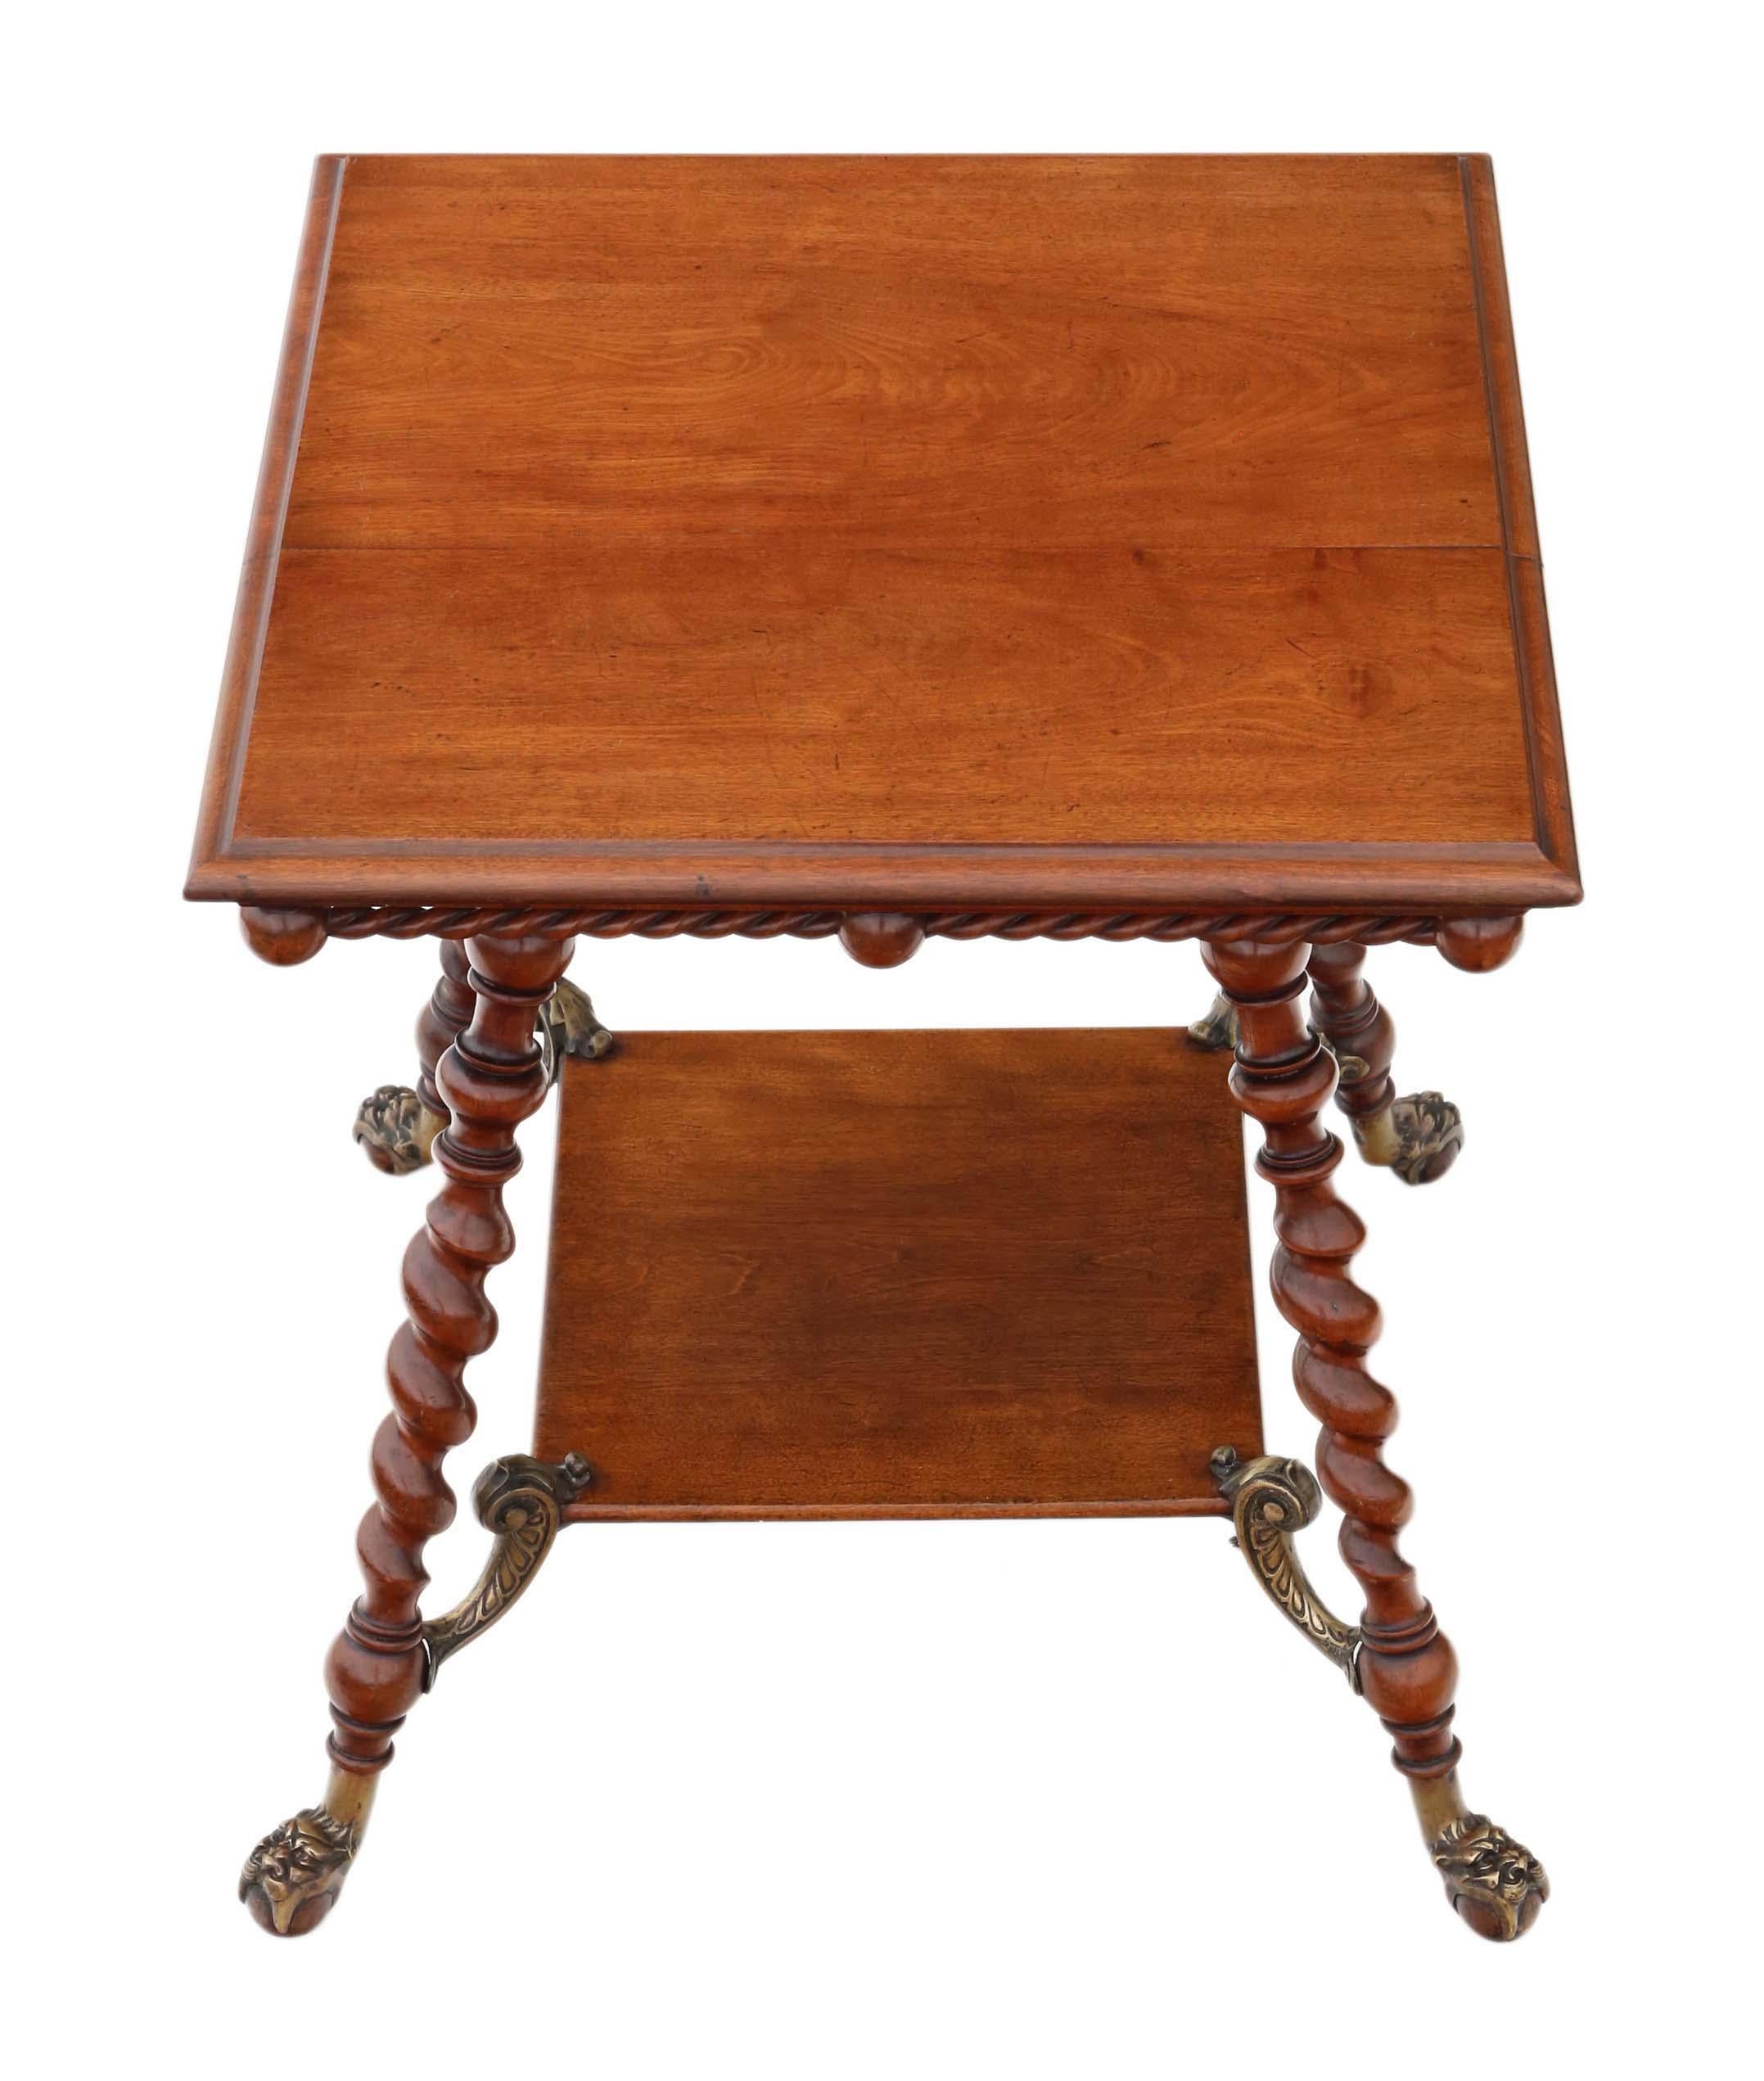 Late 19th Century Fine Quality Victorian Red Walnut and Brass Centre Table from circa 1880-1900, A For Sale